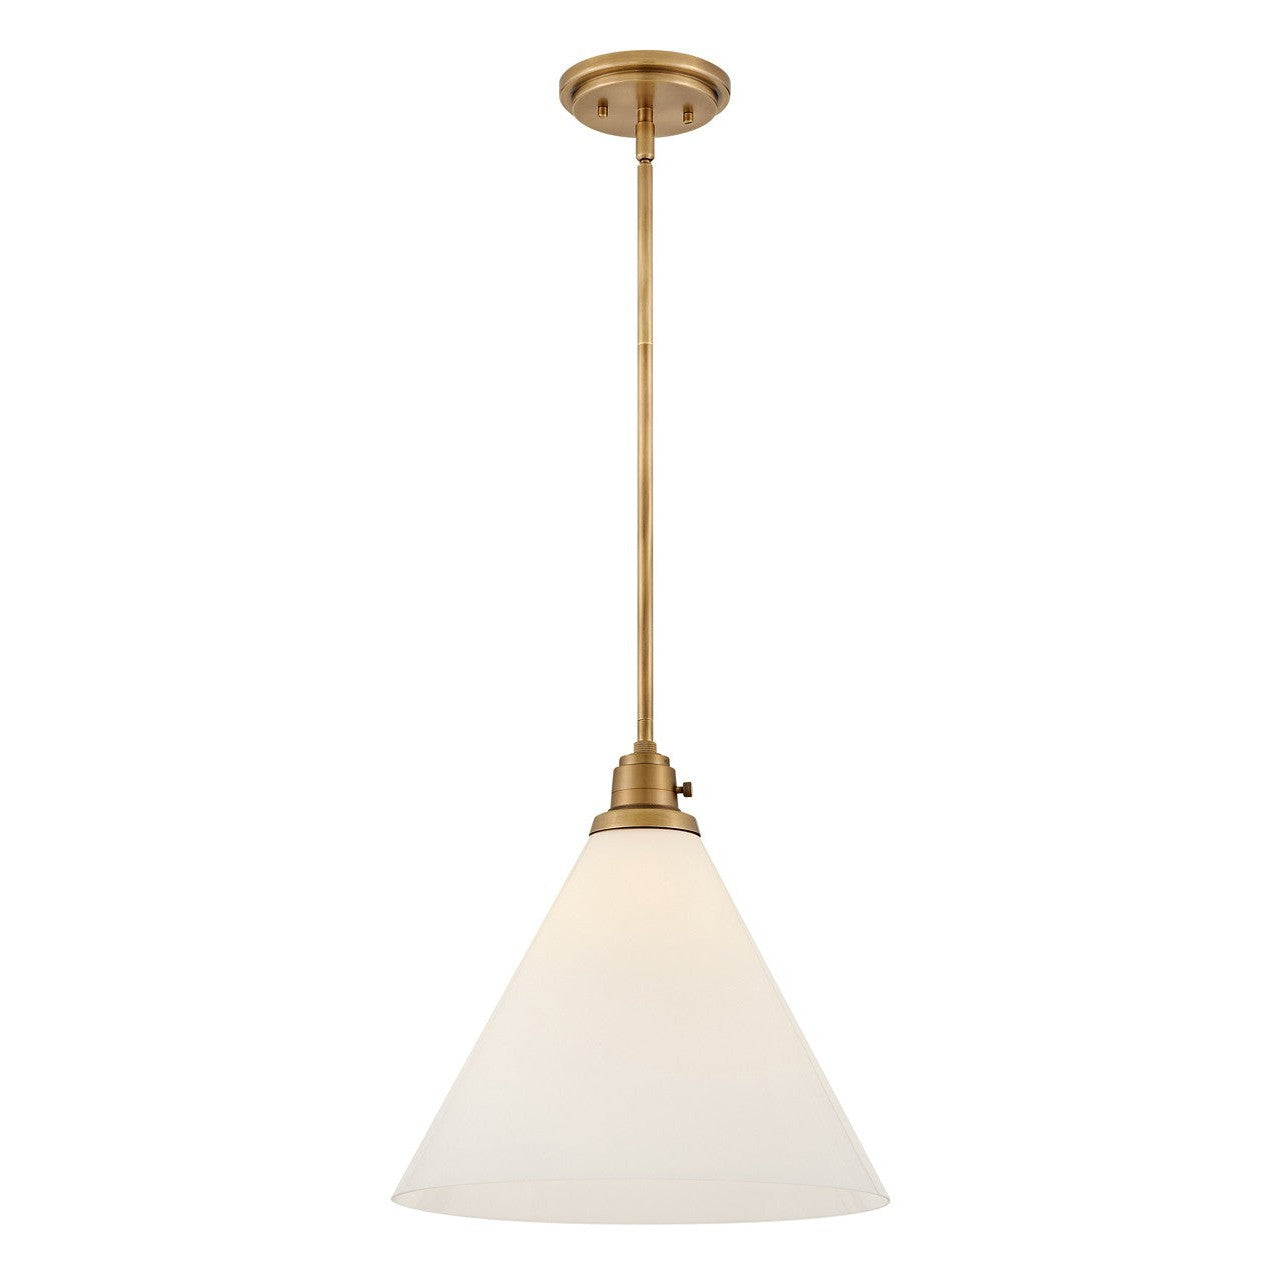 Hinkley Arti 3694HB-CO Pendant Light - Heritage Brass with Cased Opal Glass